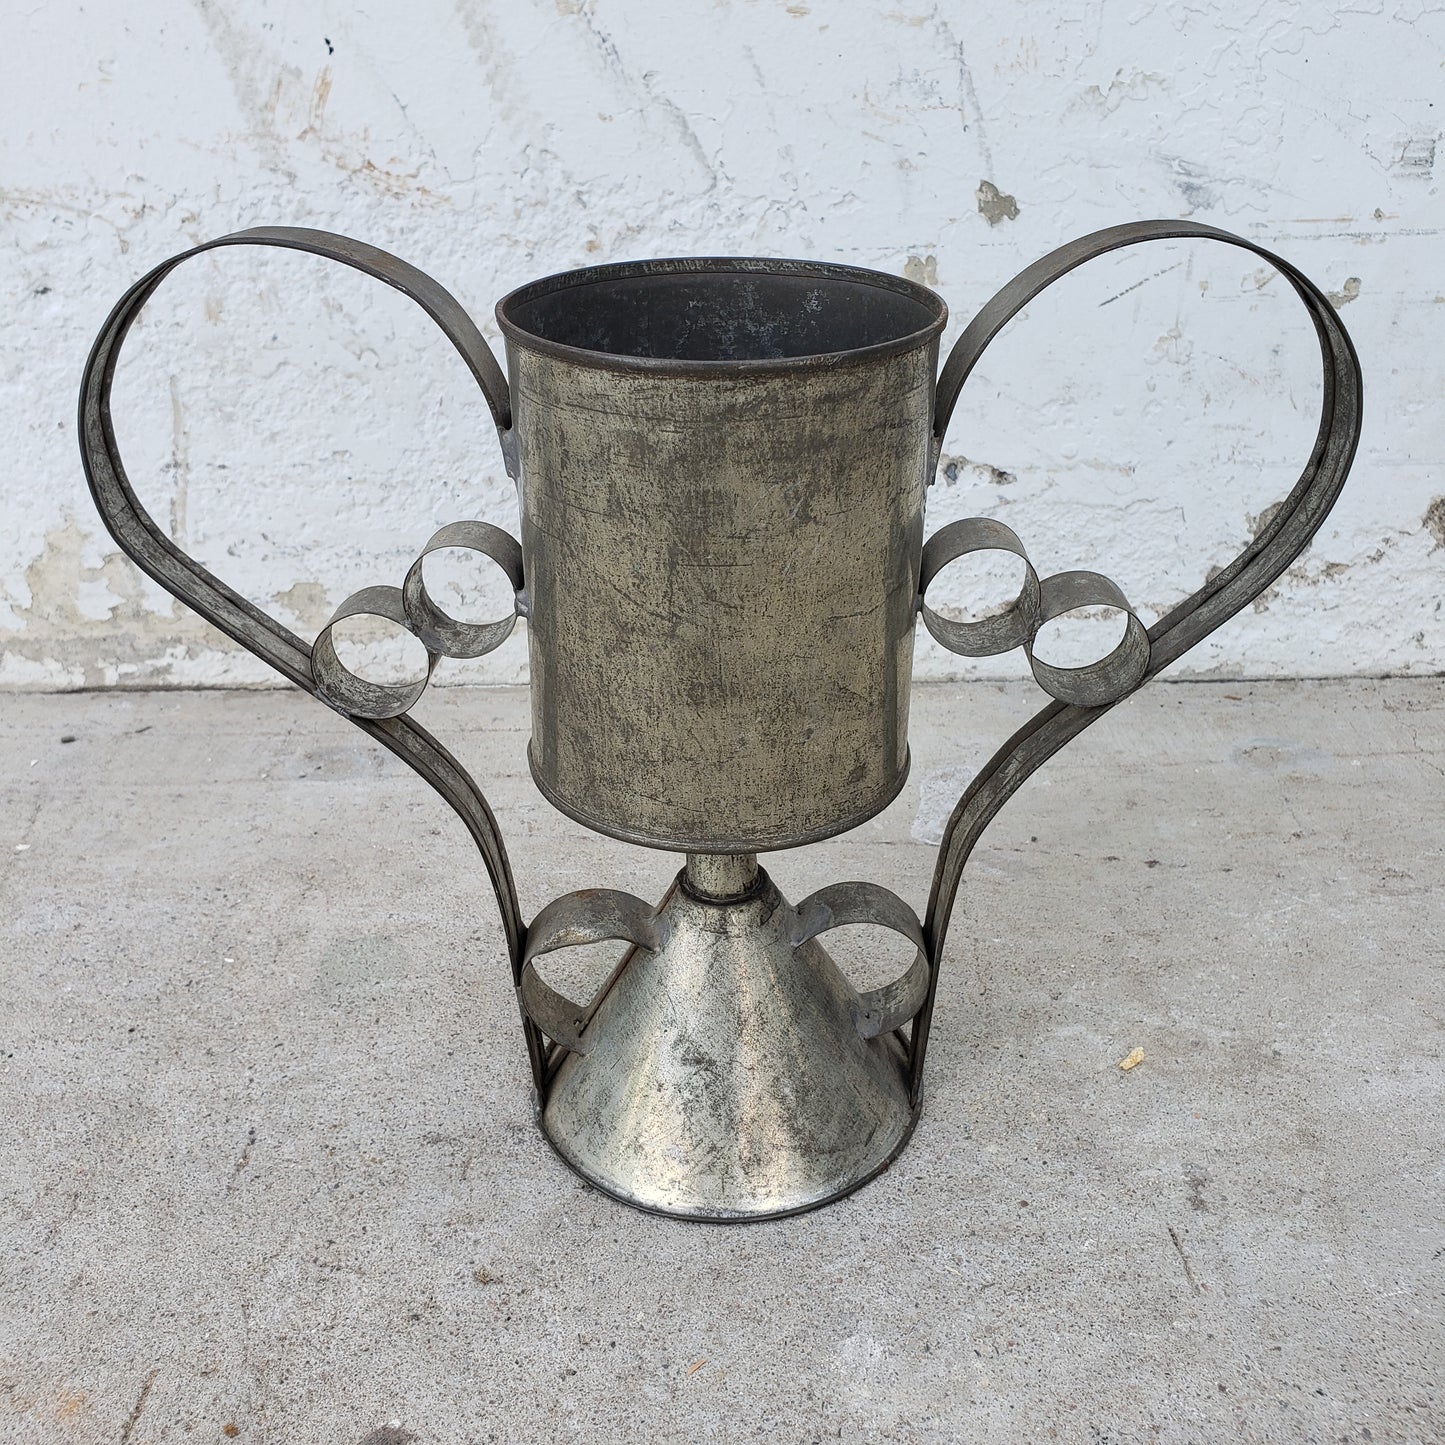 Horseshoe Pitching Tin Cup and Funnel Trophy 1940